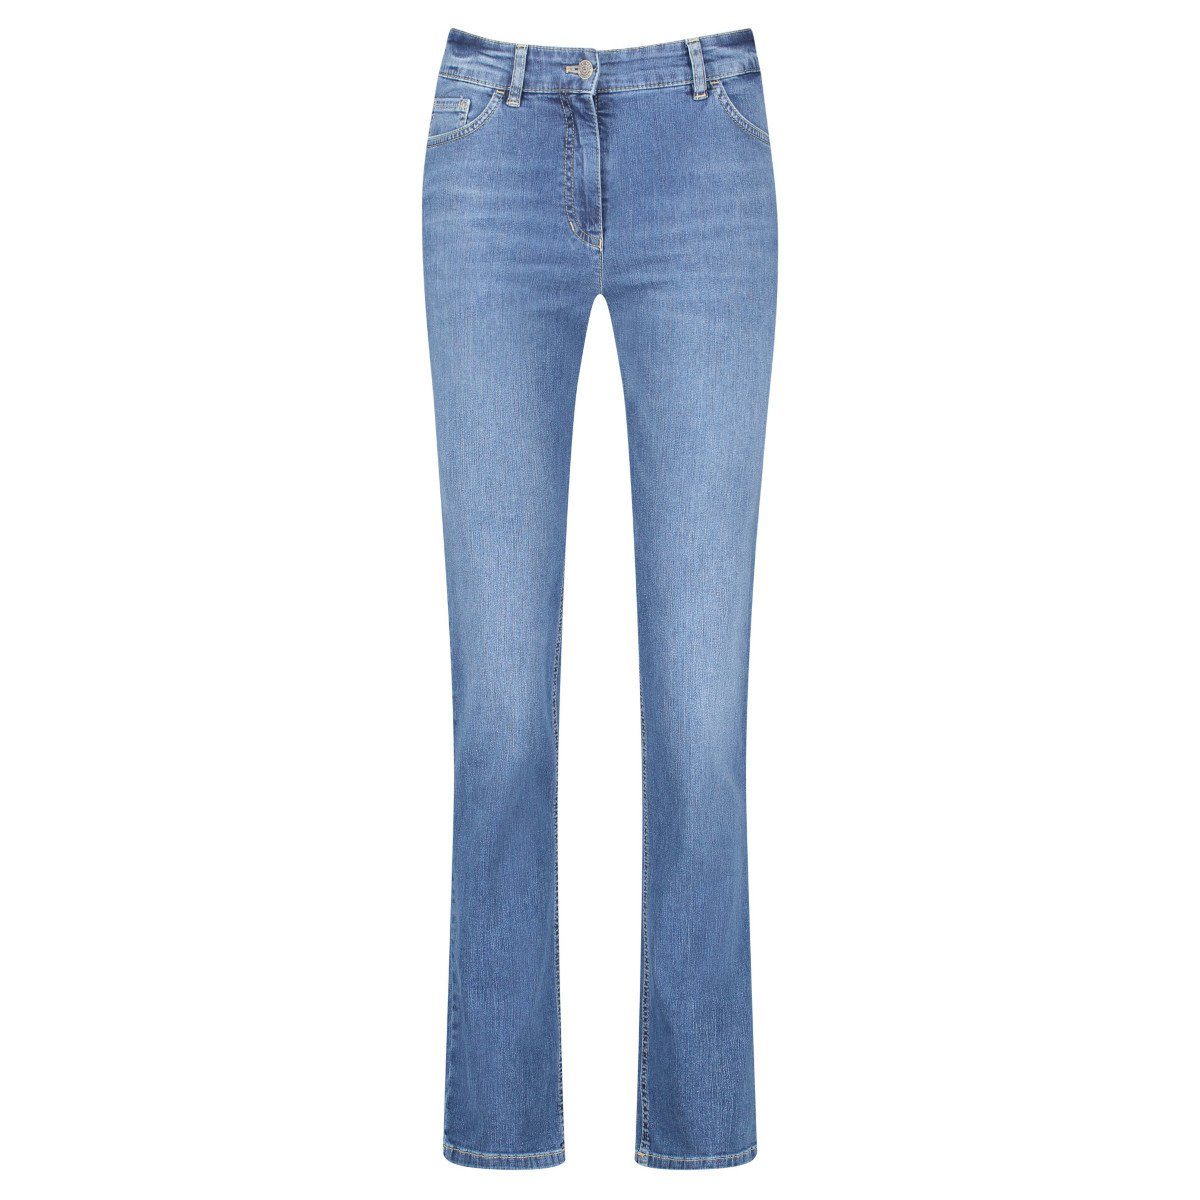 GERRY WEBER 5-Pocket-Jeans Romy Straight Fit 92307-67840 STRAIGHT FIT 873004 BLUE DENIM MIT USE